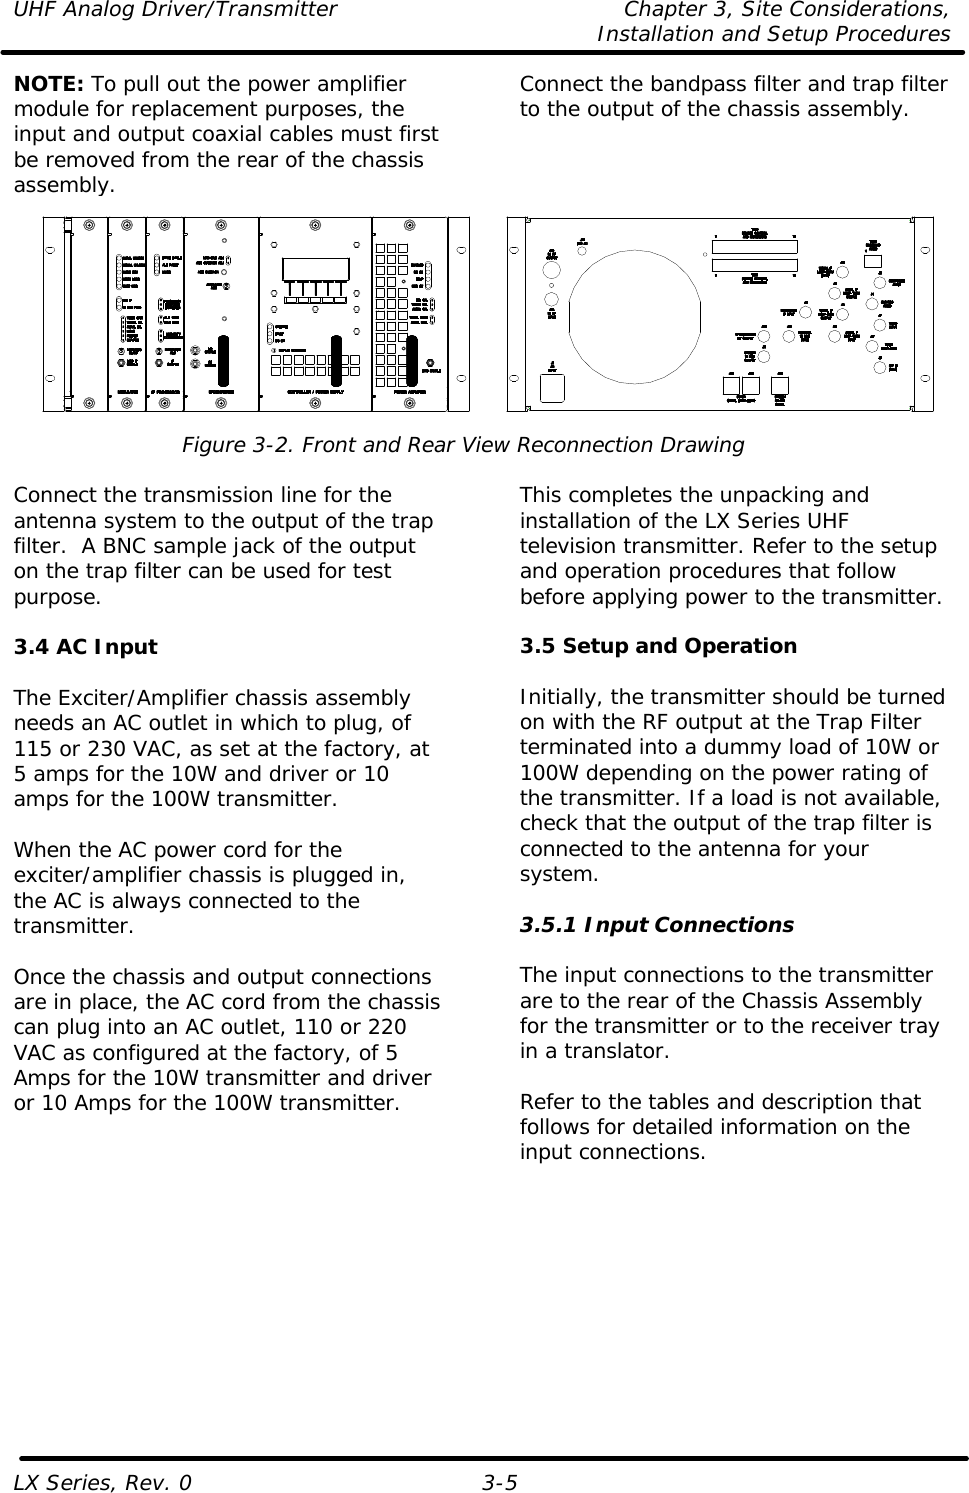 UHF Analog Driver/Transmitter Chapter 3, Site Considerations,   Installation and Setup Procedures LX Series, Rev. 0 3-5 NOTE: To pull out the power amplifier module for replacement purposes, the input and output coaxial cables must first be removed from the rear of the chassis assembly. Connect the bandpass filter and trap filter to the output of the chassis assembly.   Figure 3-2. Front and Rear View Reconnection Drawing  Connect the transmission line for the antenna system to the output of the trap filter.  A BNC sample jack of the output on the trap filter can be used for test purpose.  3.4 AC Input  The Exciter/Amplifier chassis assembly needs an AC outlet in which to plug, of 115 or 230 VAC, as set at the factory, at 5 amps for the 10W and driver or 10 amps for the 100W transmitter.  When the AC power cord for the exciter/amplifier chassis is plugged in, the AC is always connected to the transmitter.   Once the chassis and output connections are in place, the AC cord from the chassis can plug into an AC outlet, 110 or 220 VAC as configured at the factory, of 5 Amps for the 10W transmitter and driver or 10 Amps for the 100W transmitter.  This completes the unpacking and installation of the LX Series UHF television transmitter. Refer to the setup and operation procedures that follow before applying power to the transmitter.  3.5 Setup and Operation  Initially, the transmitter should be turned on with the RF output at the Trap Filter terminated into a dummy load of 10W or 100W depending on the power rating of the transmitter. If a load is not available, check that the output of the trap filter is connected to the antenna for your system.  3.5.1 Input Connections  The input connections to the transmitter are to the rear of the Chassis Assembly for the transmitter or to the receiver tray in a translator.  Refer to the tables and description that follows for detailed information on the input connections.  